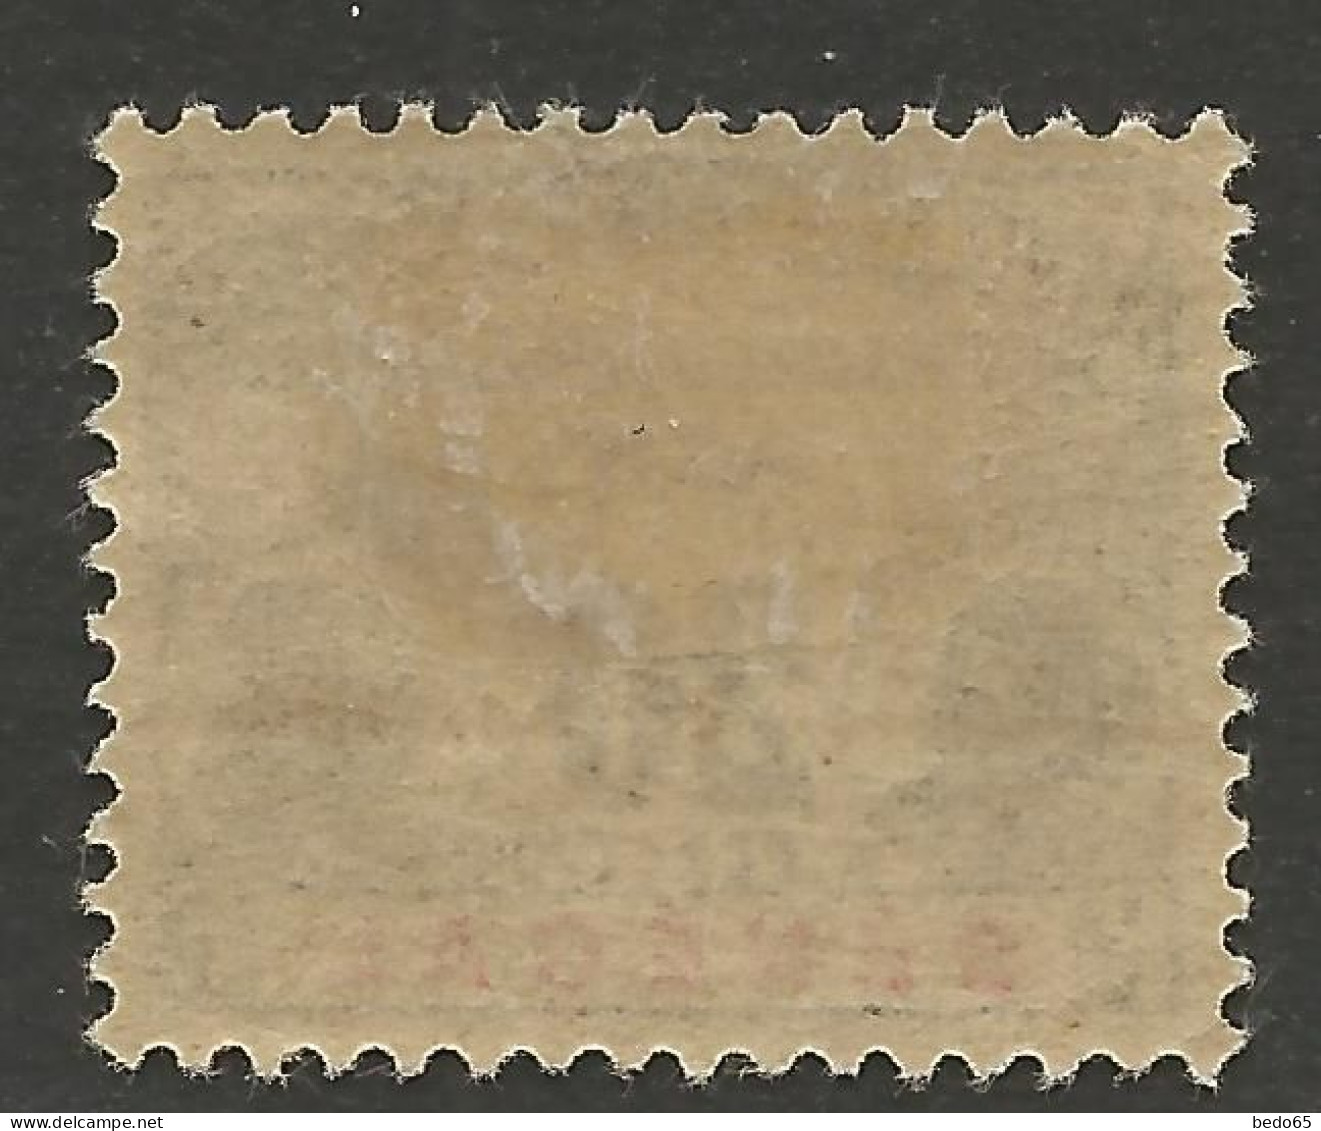 SENEGAL TAXE N° 7 NEUF*  CHARNIERE / Hinge / MH - Postage Due